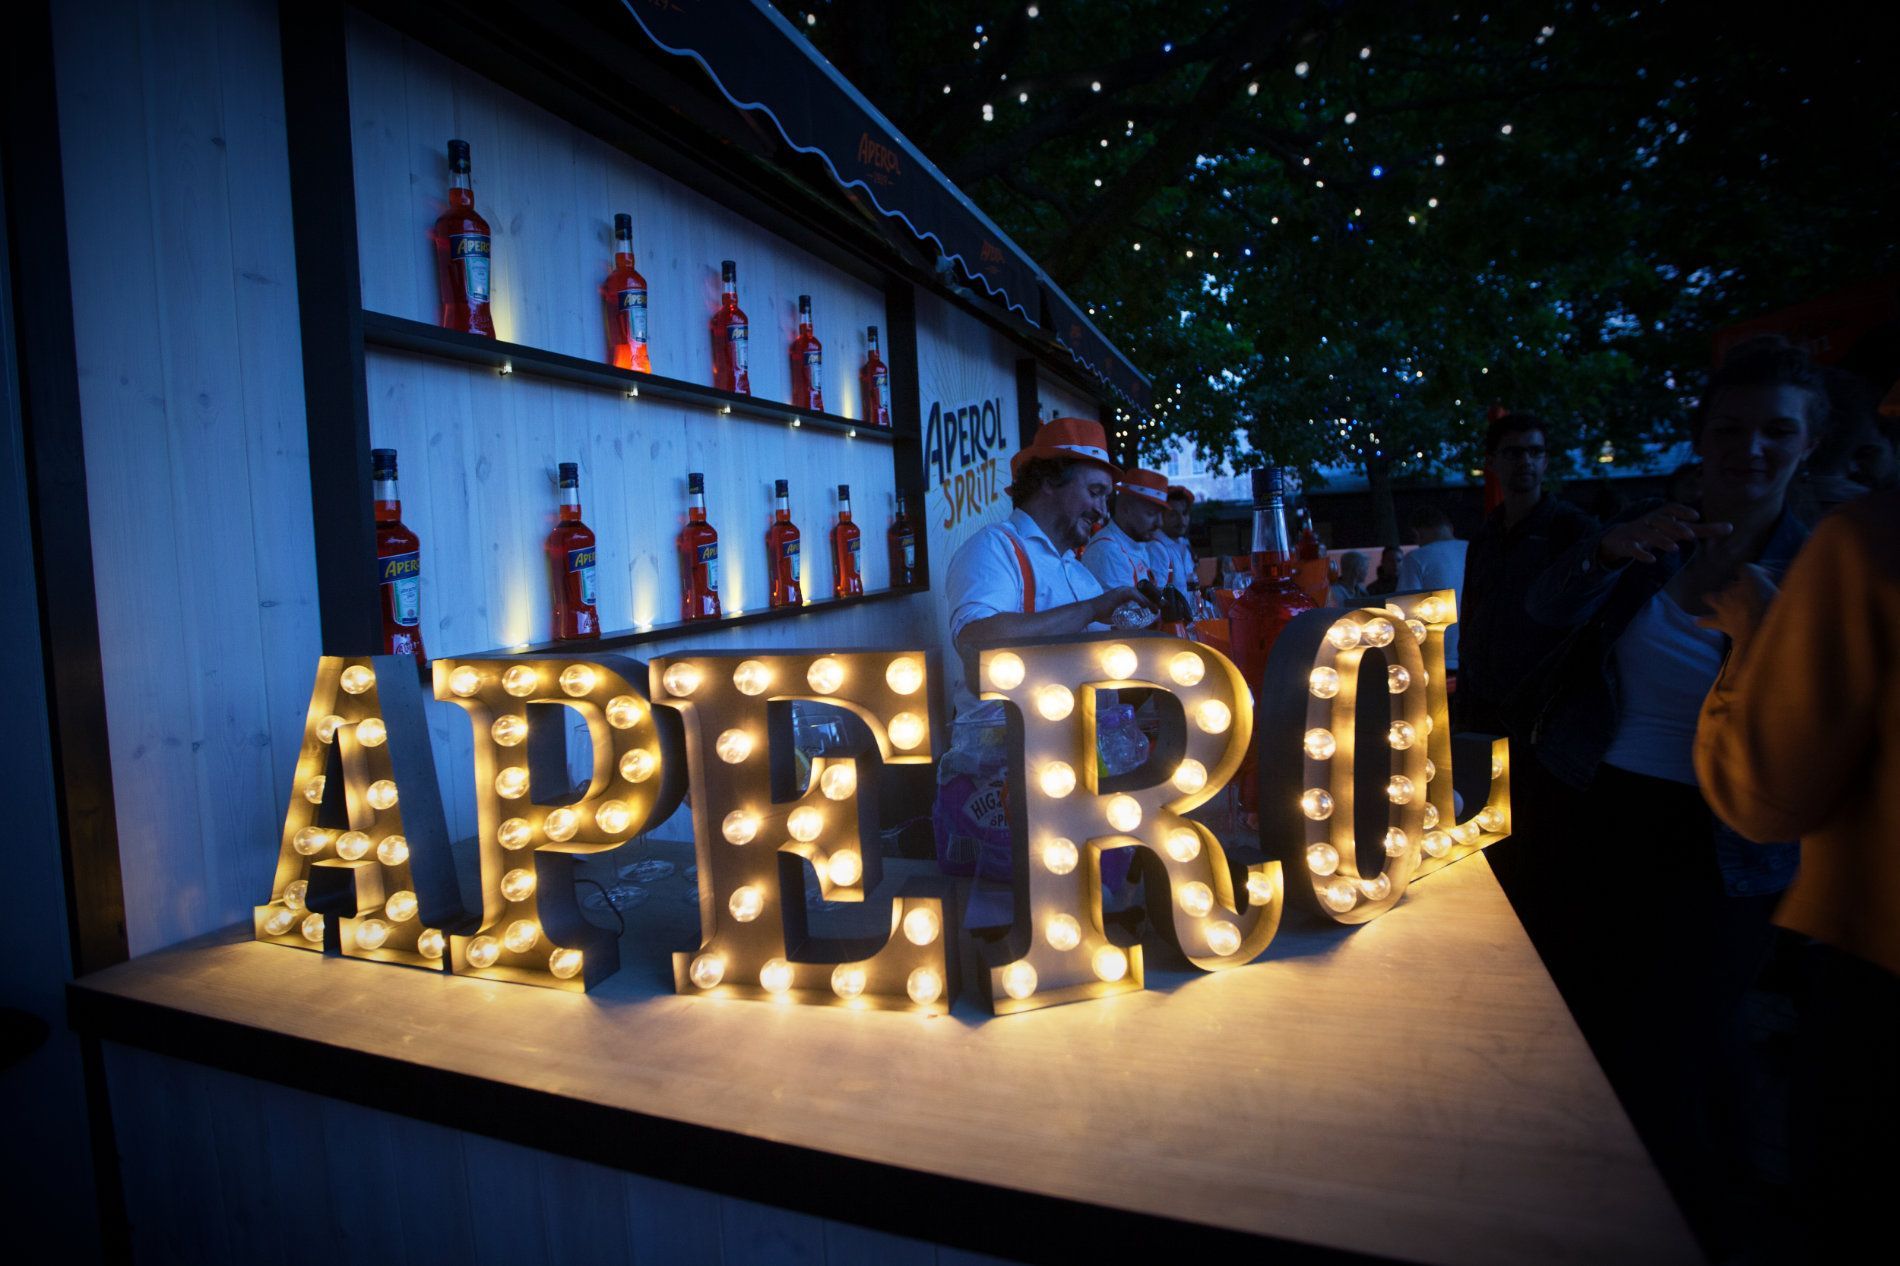 a sign that says aperol is lit up at night